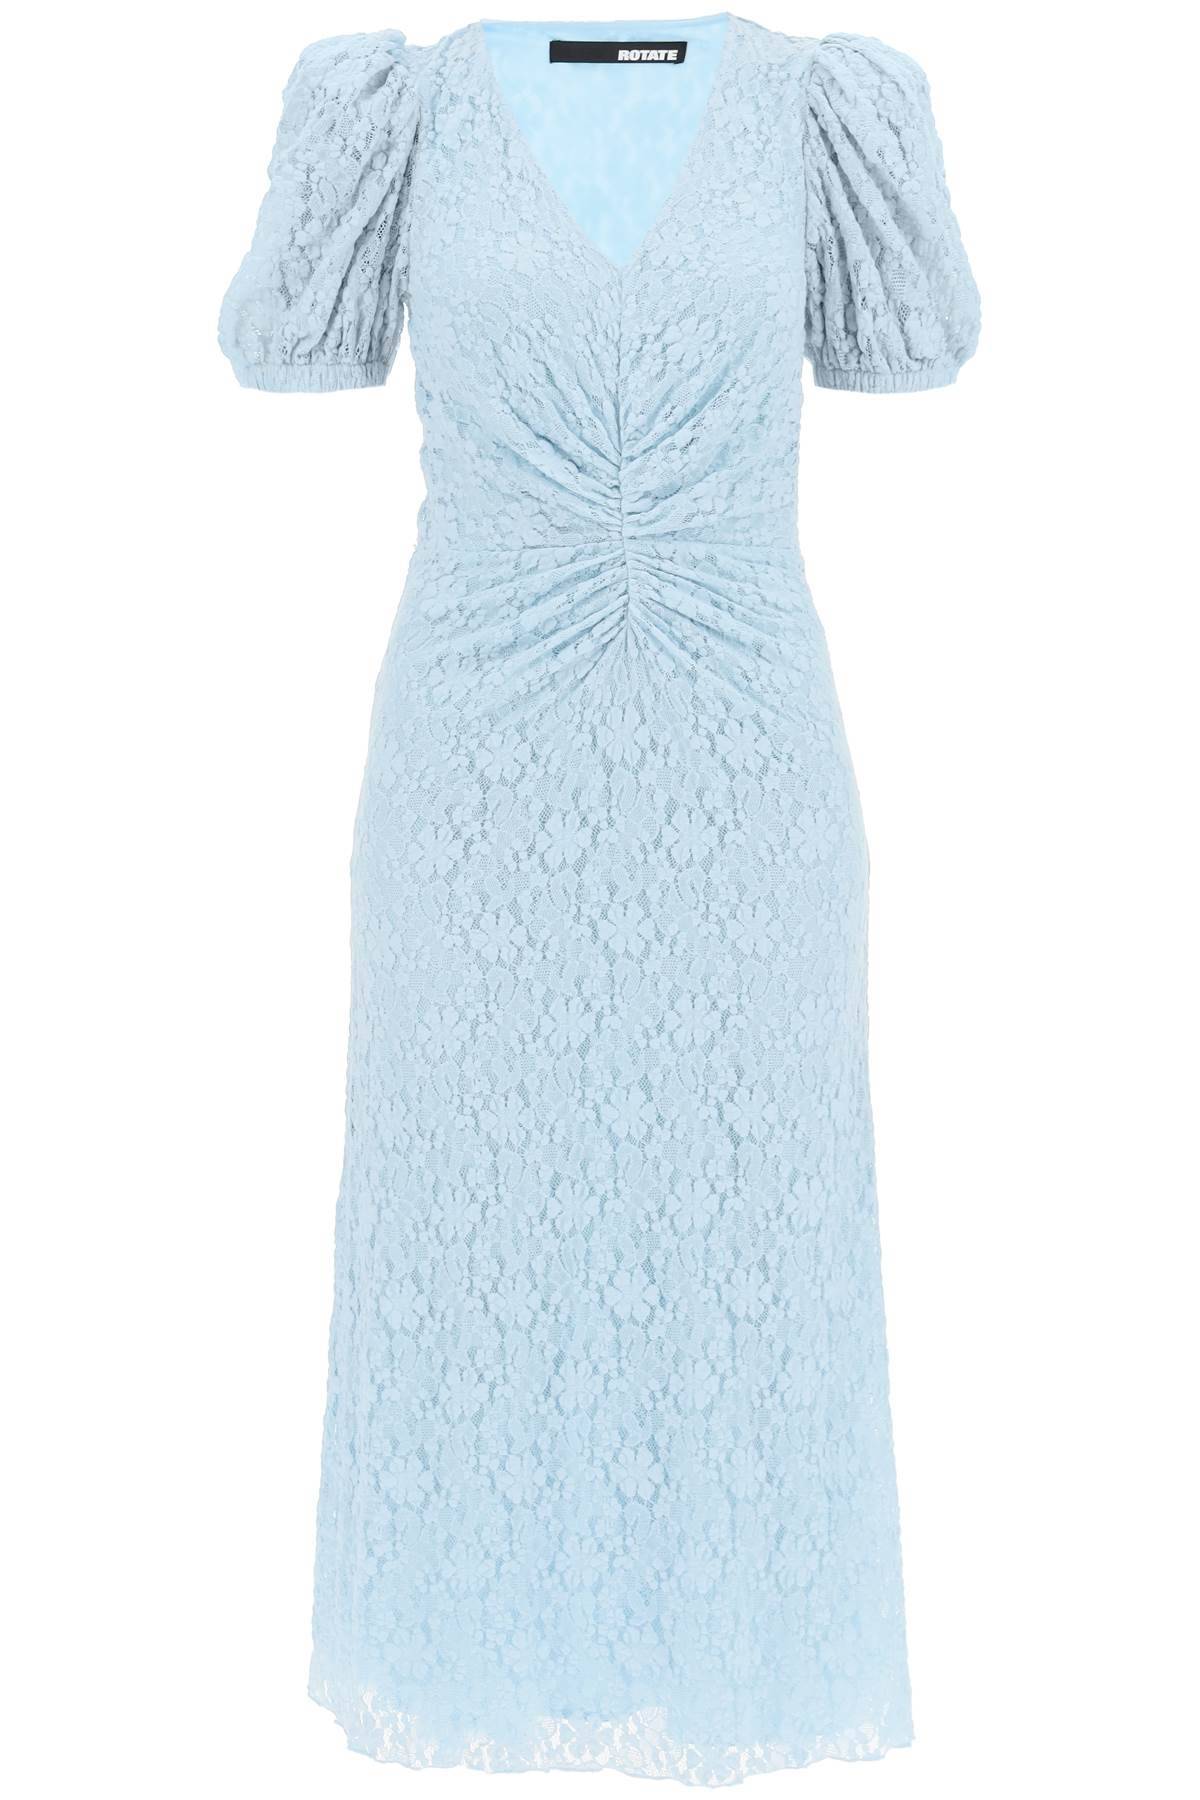 Rotate ROTATE midi lace dress with puffed sleeves